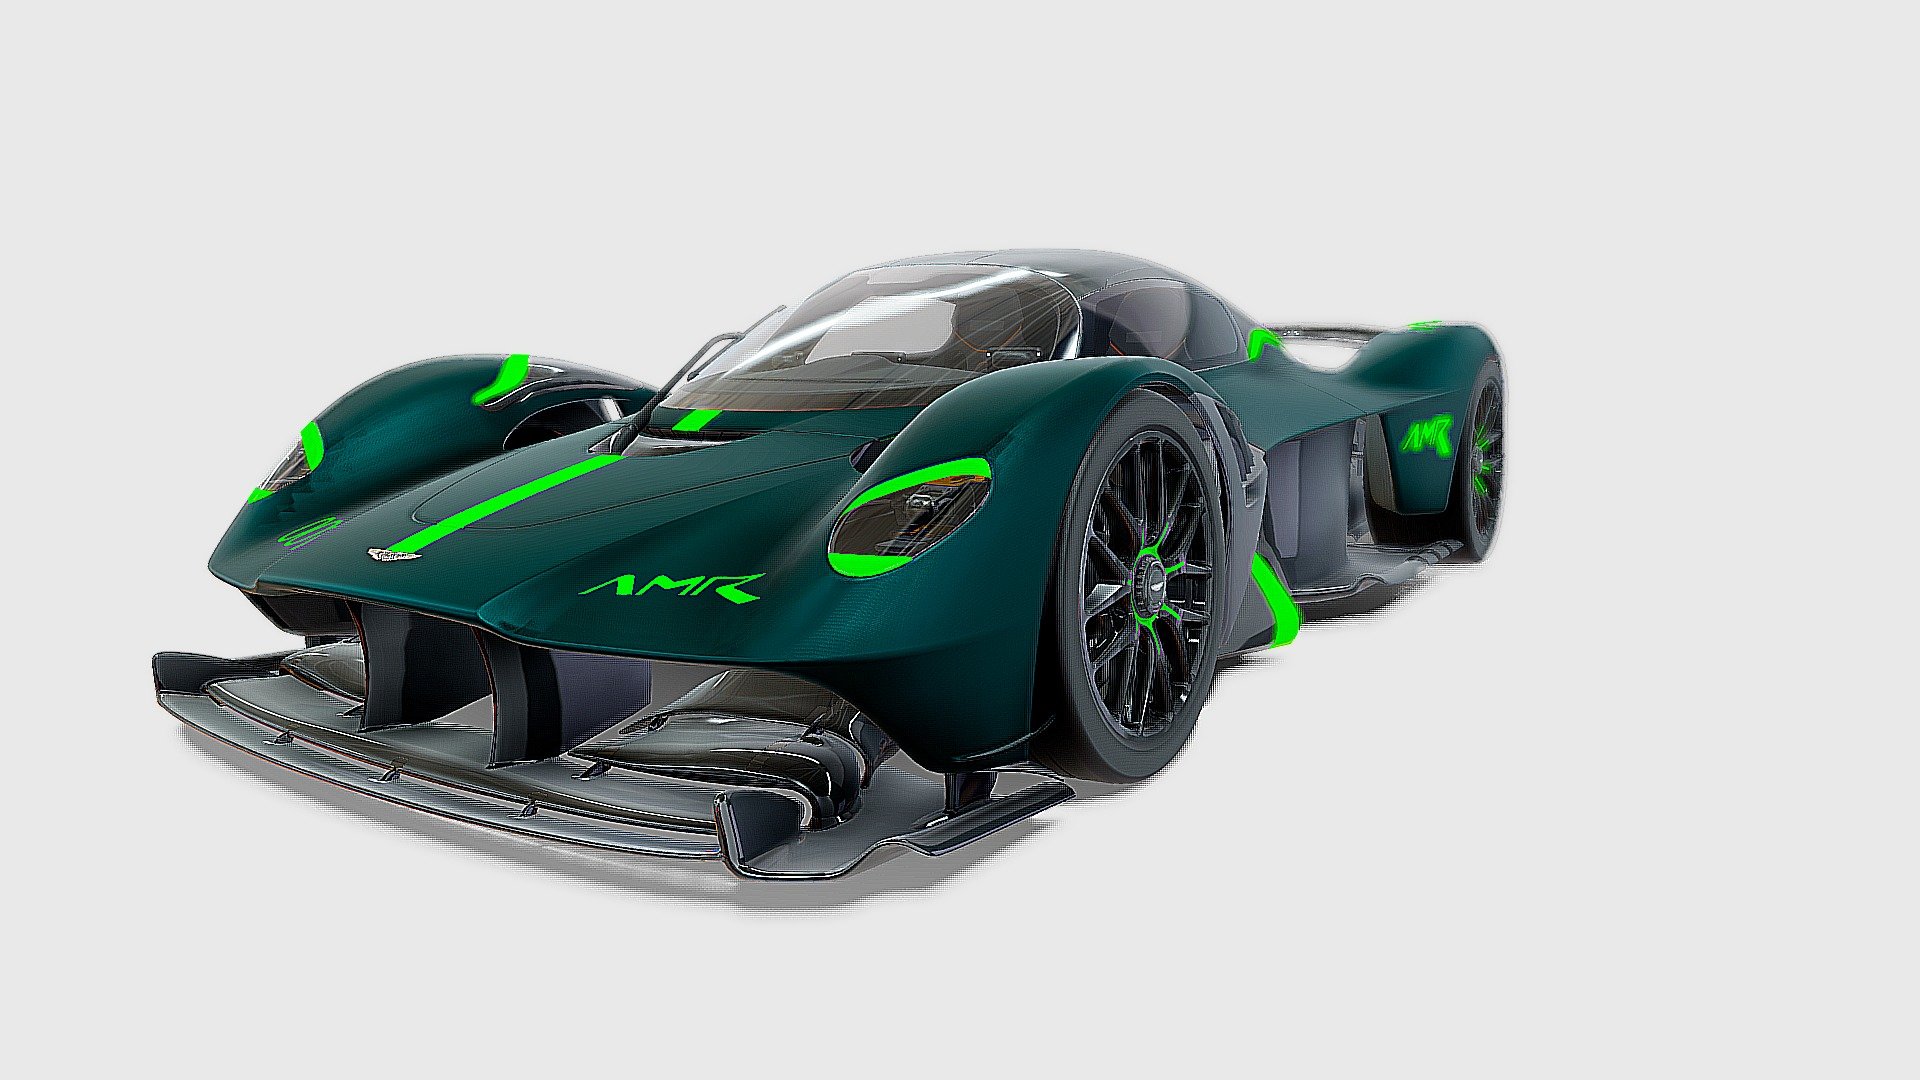 The Aston Martin Valkyrie, also known by its internal code names AM-RB 001 (for Aston Martin Red Bull 001) and Nebula, is a supercar produced by the British automobile manufacturer Aston Martin from November 2021. It is a two-door coupe offering two seats, whose design is inspired by Formula 1 single-seaters. The manufacturer created it in collaboration with Red Bull Advanced Technologies. The final version of the Valkyrie is presented at the 2019 Geneva International Motor Show. Aston Martin announces a production limited to 150 examples, and 25 additional examples for the AMR Pro version reserved for use on the circuit 3d model